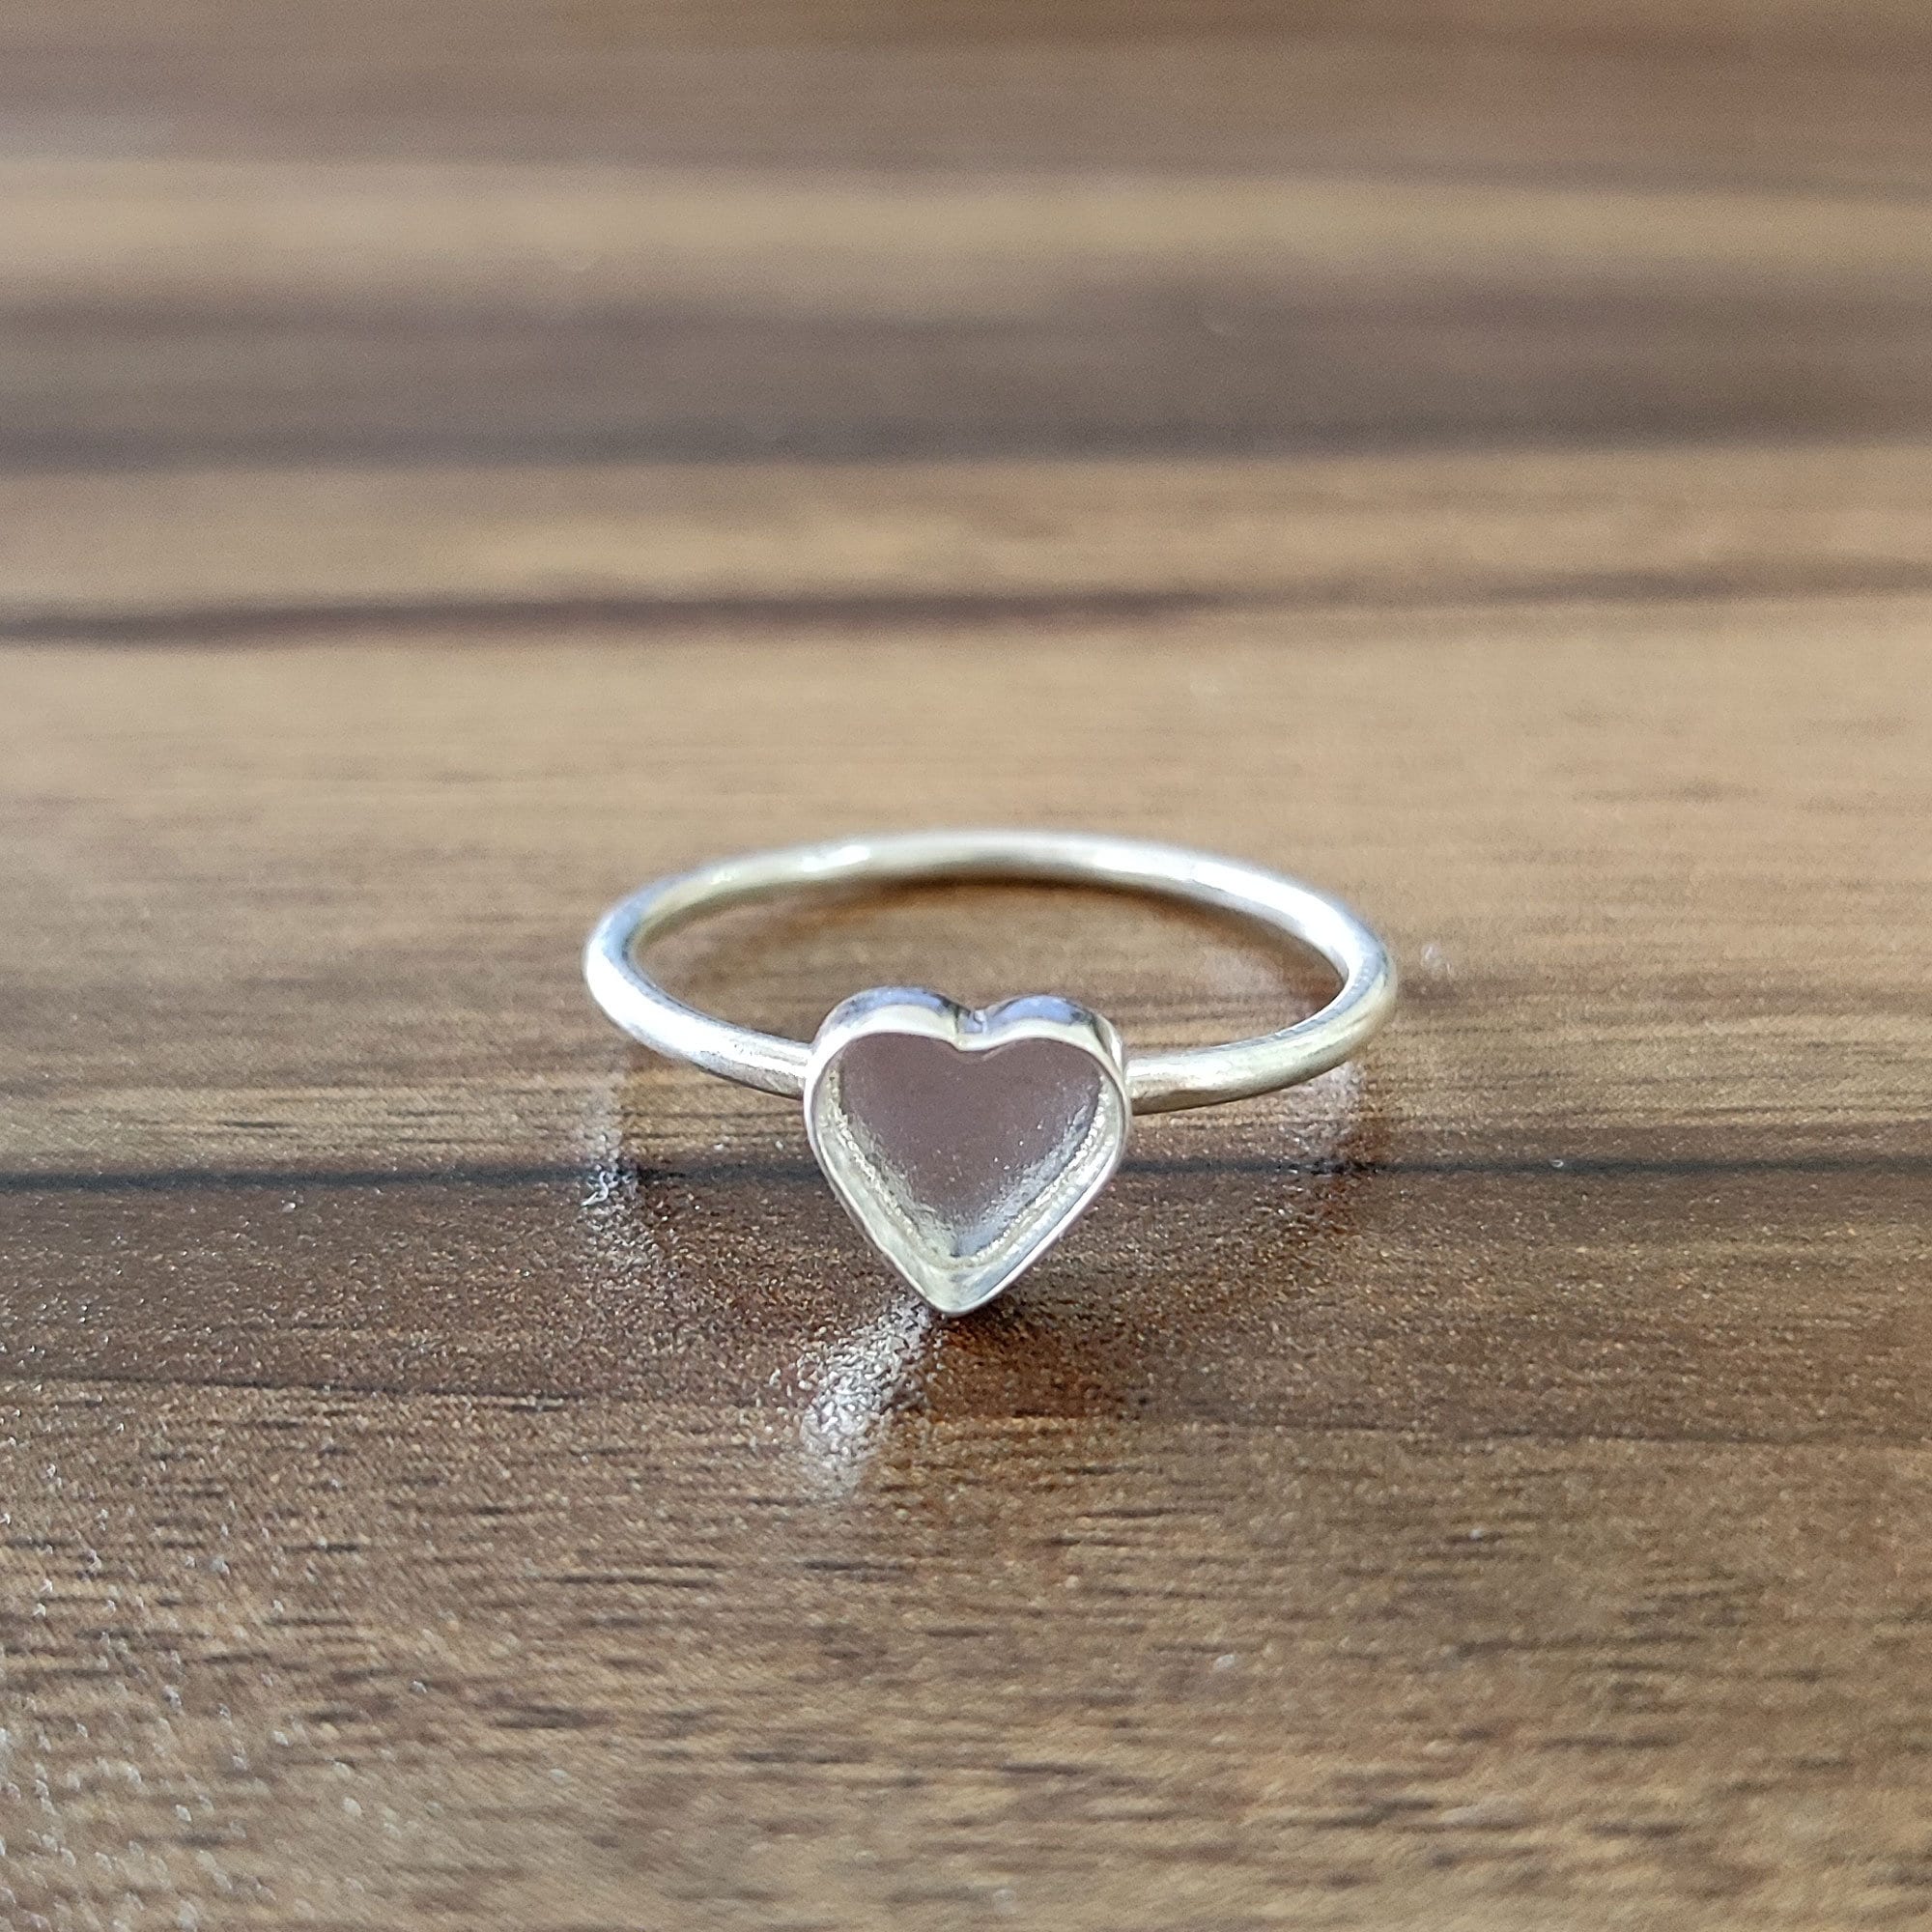 Crystal Heart Ring, Purple Heart Ring, Pink Heart Ring, Promise Ring, Best  Friend Rings, Adjustable Ring, Open Ring, Anniversary Gift 